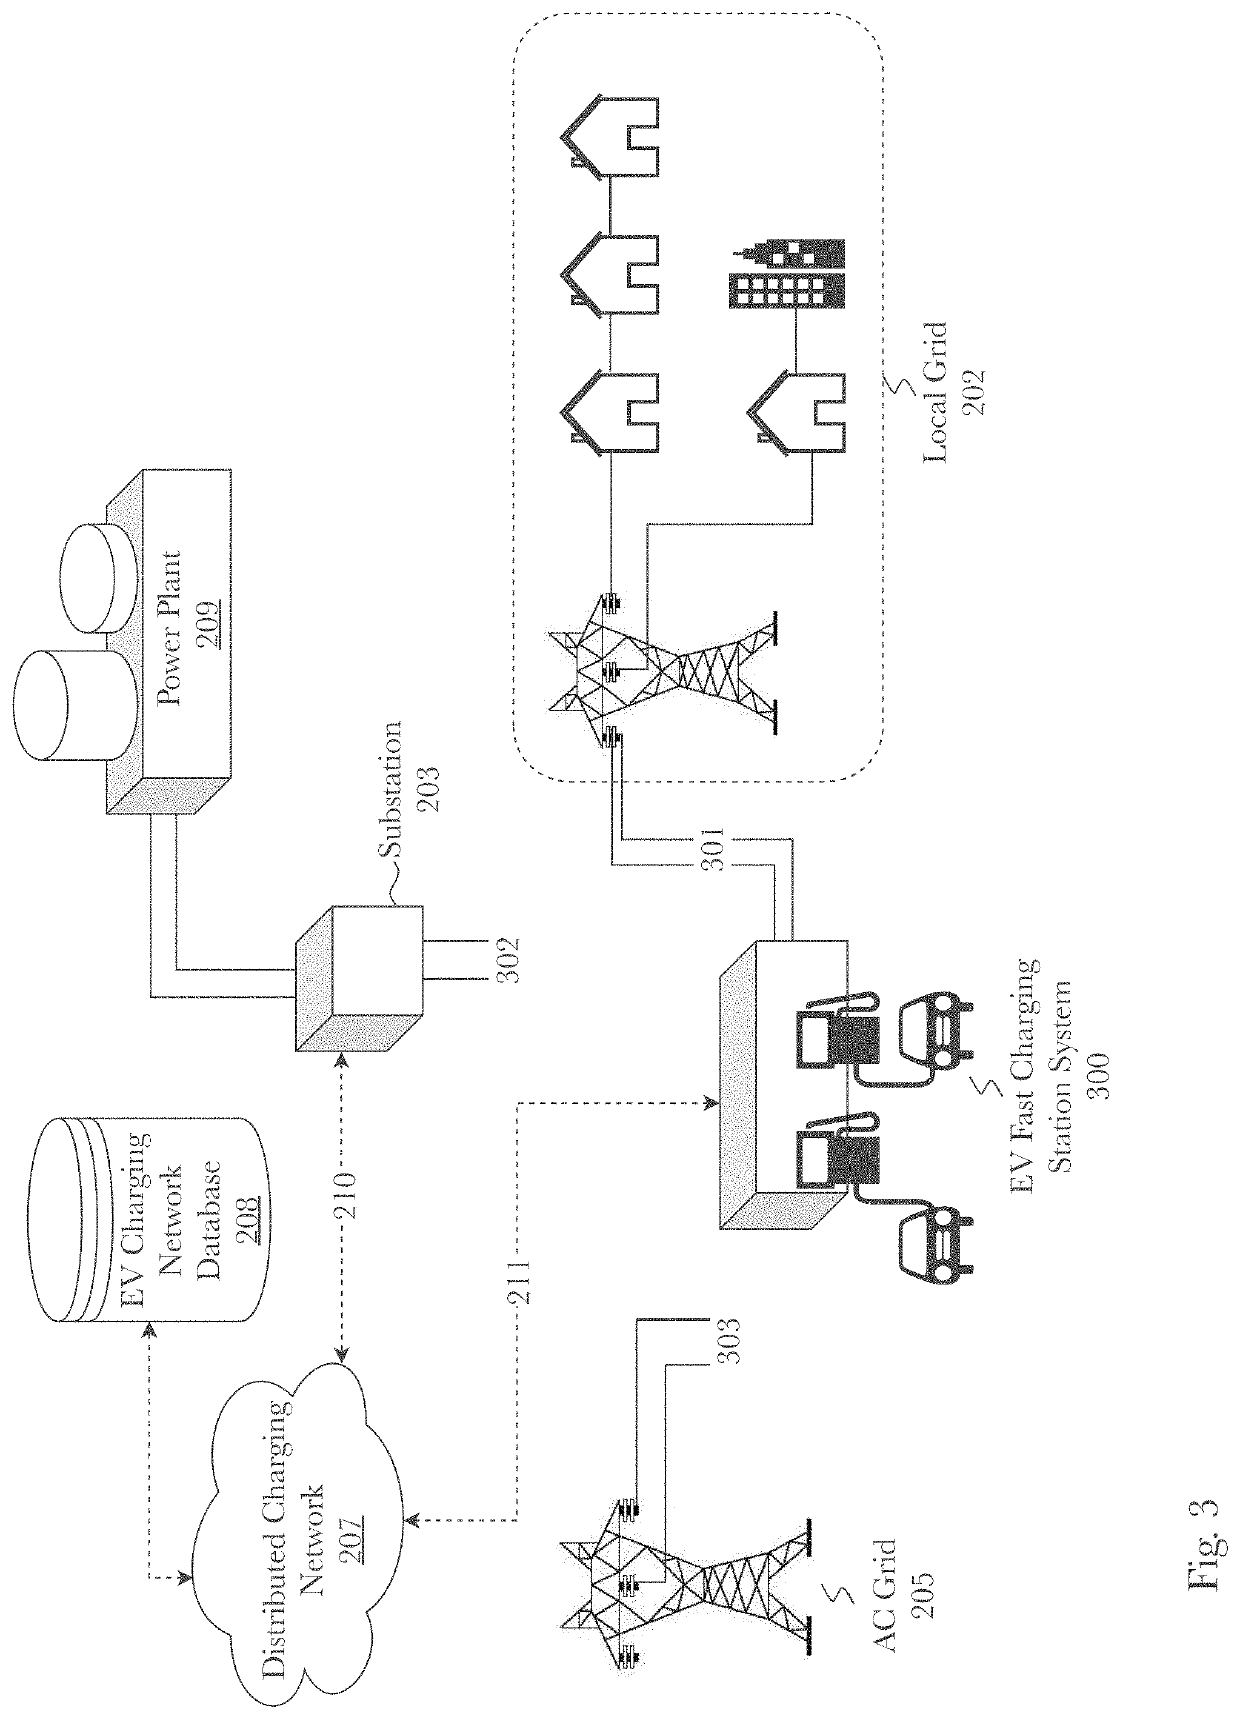 System and method for electrical grid management, risk mitigation, and resilience